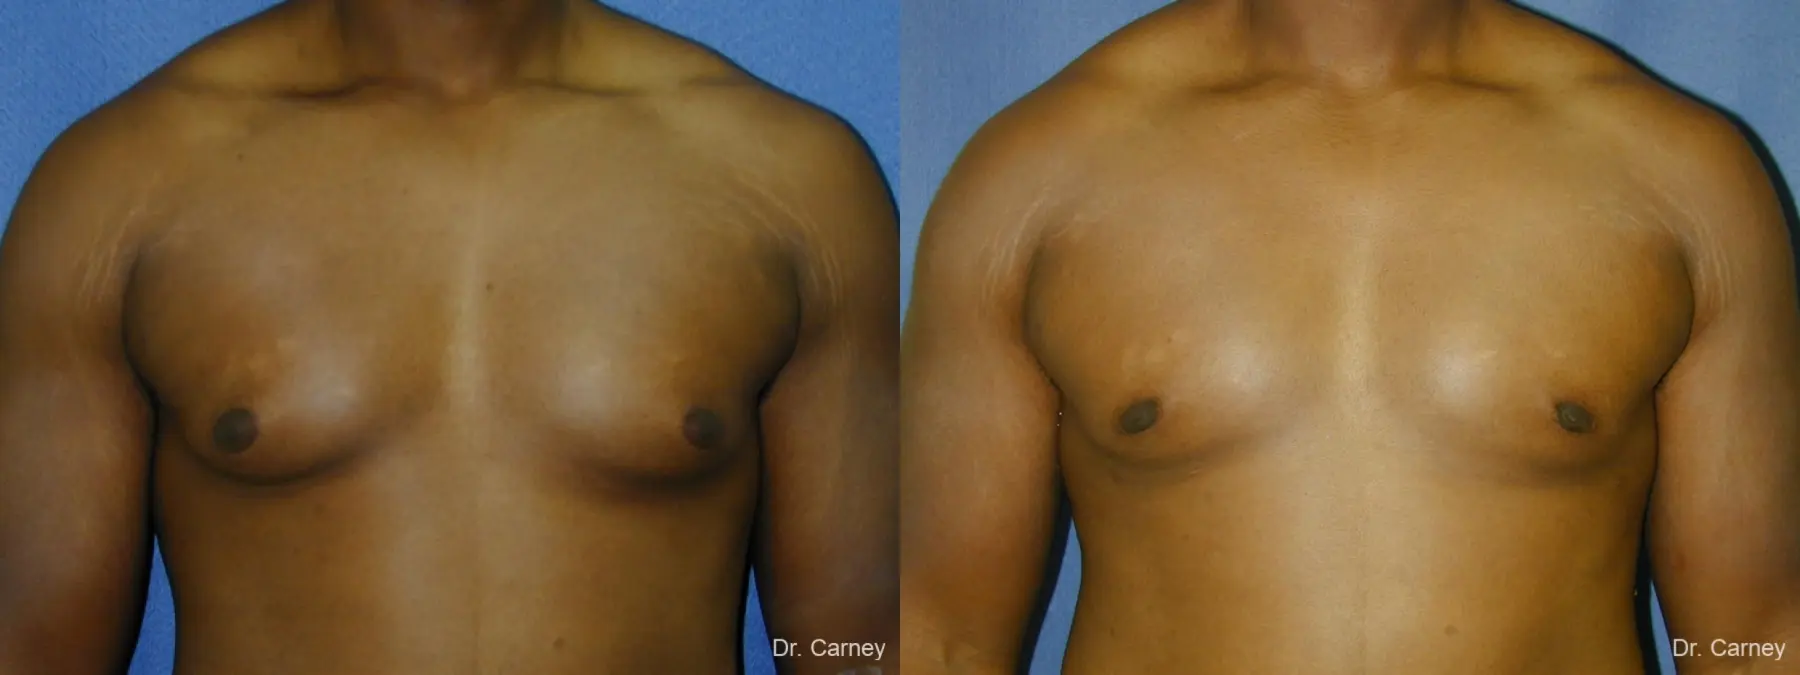 Virginia Beach Gynecomastia 1226 - Before and After